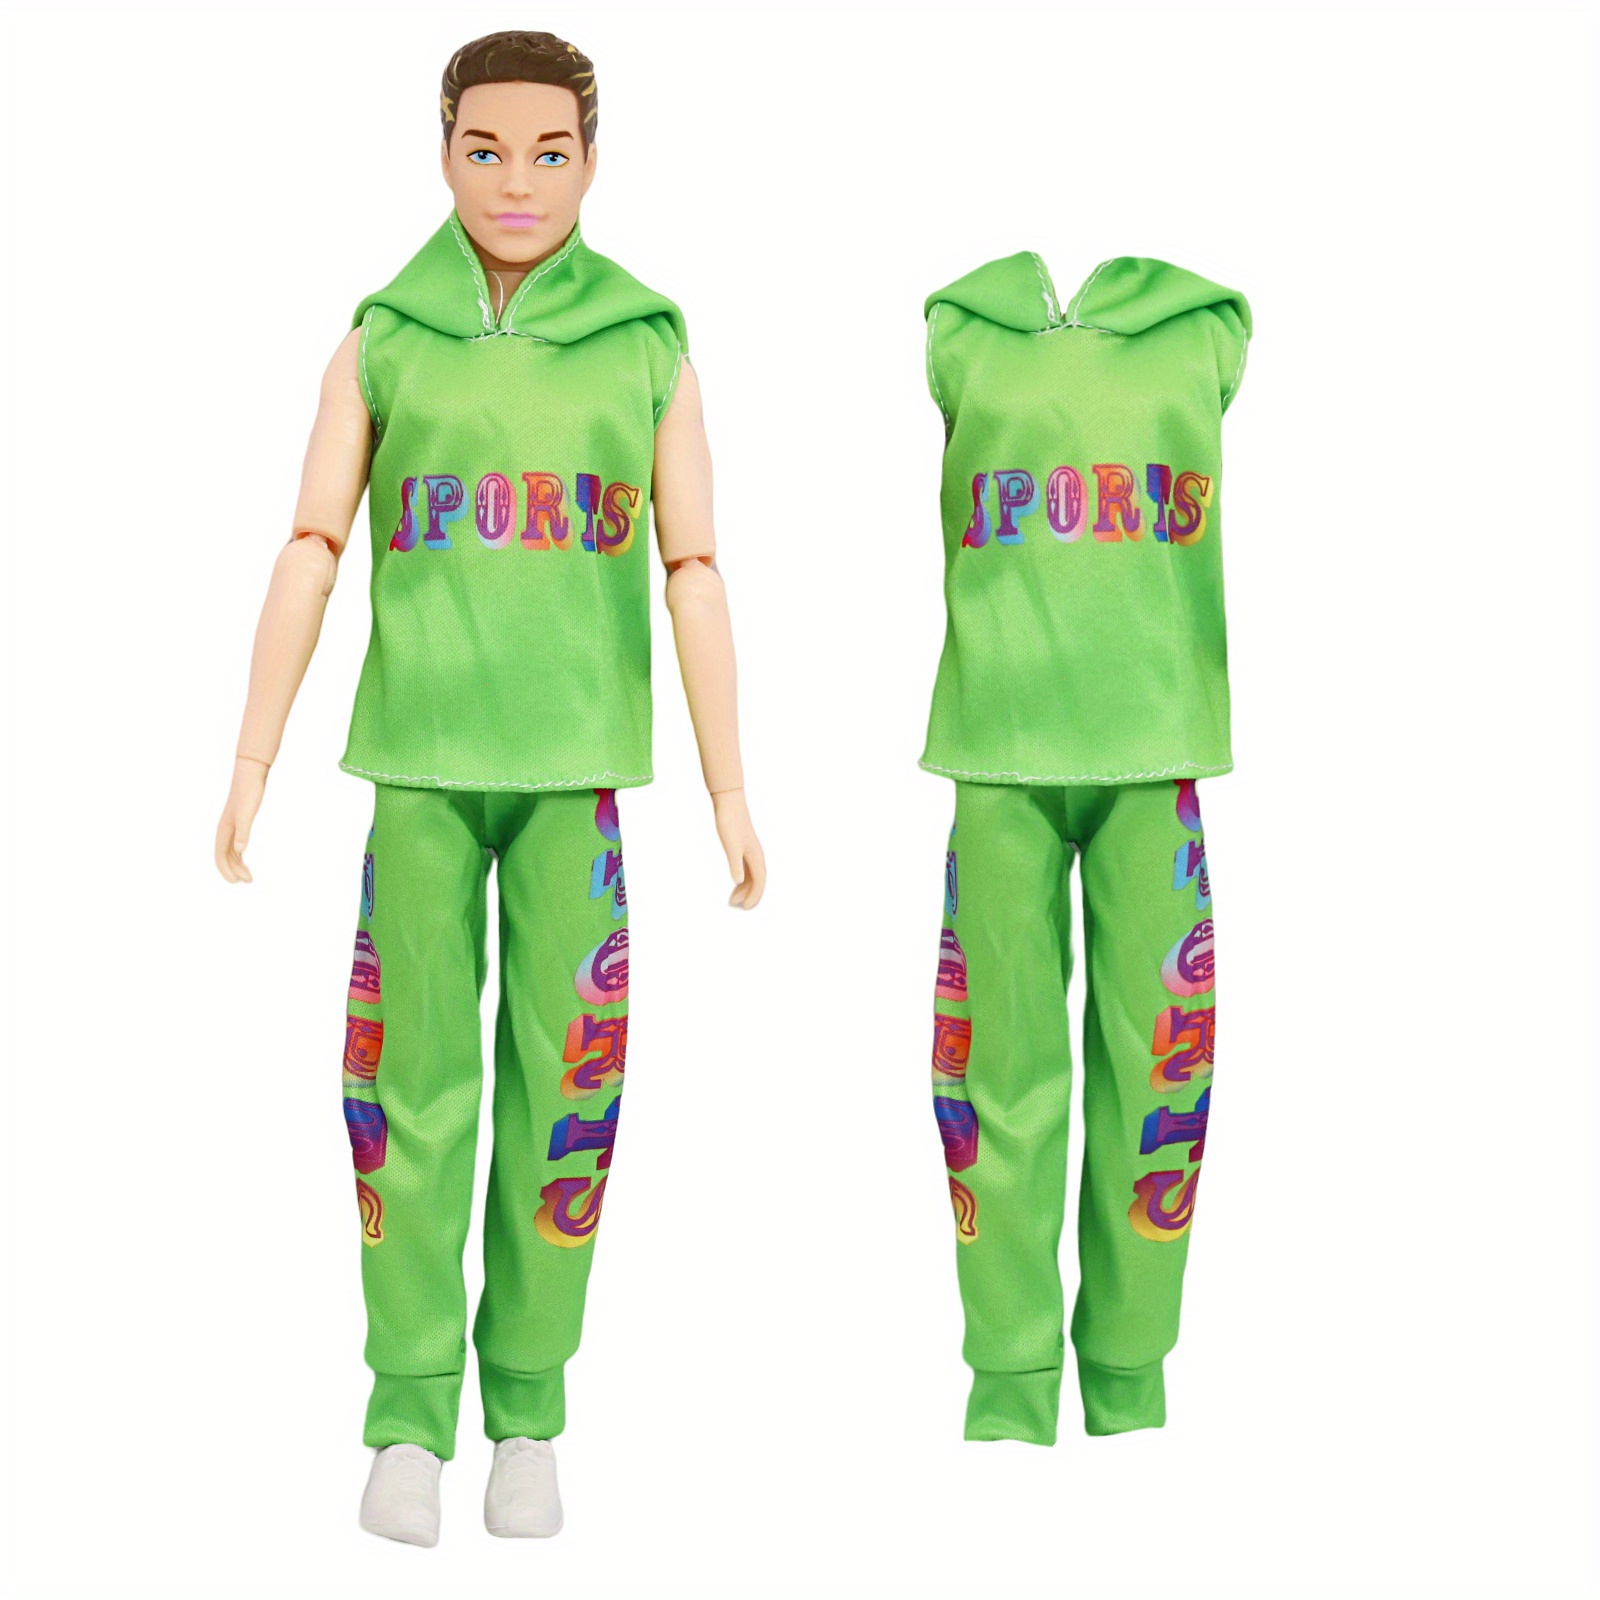 11.5 Inch Ken Doll Clothes And Accessories, Doll Outfit For 12 Inch Ken Boy  Doll,Including 3 Casual Top 3 Pants 2 Pairs Of Shoes 1 Glasses 1 Headph